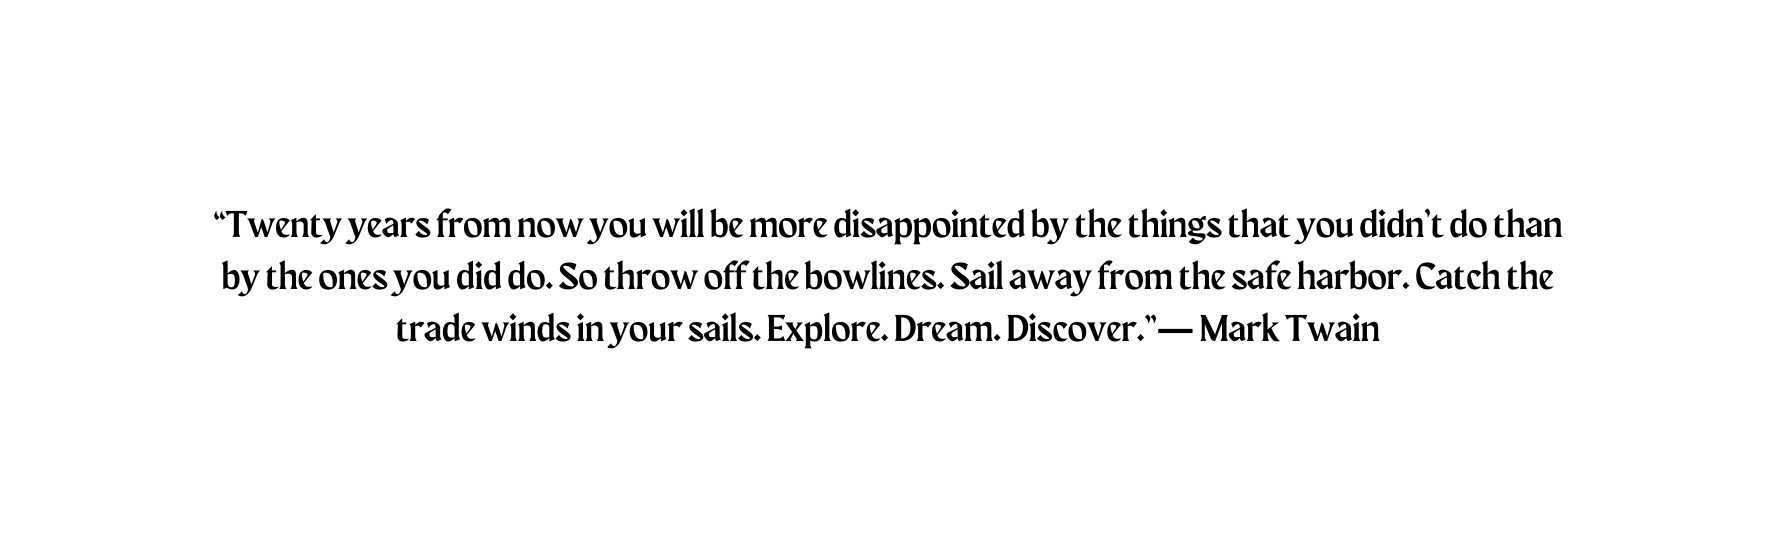 Twenty years from now you will be more disappointed by the things that you didn t do than by the ones you did do So throw off the bowlines Sail away from the safe harbor Catch the trade winds in your sails Explore Dream Discover Mark Twain